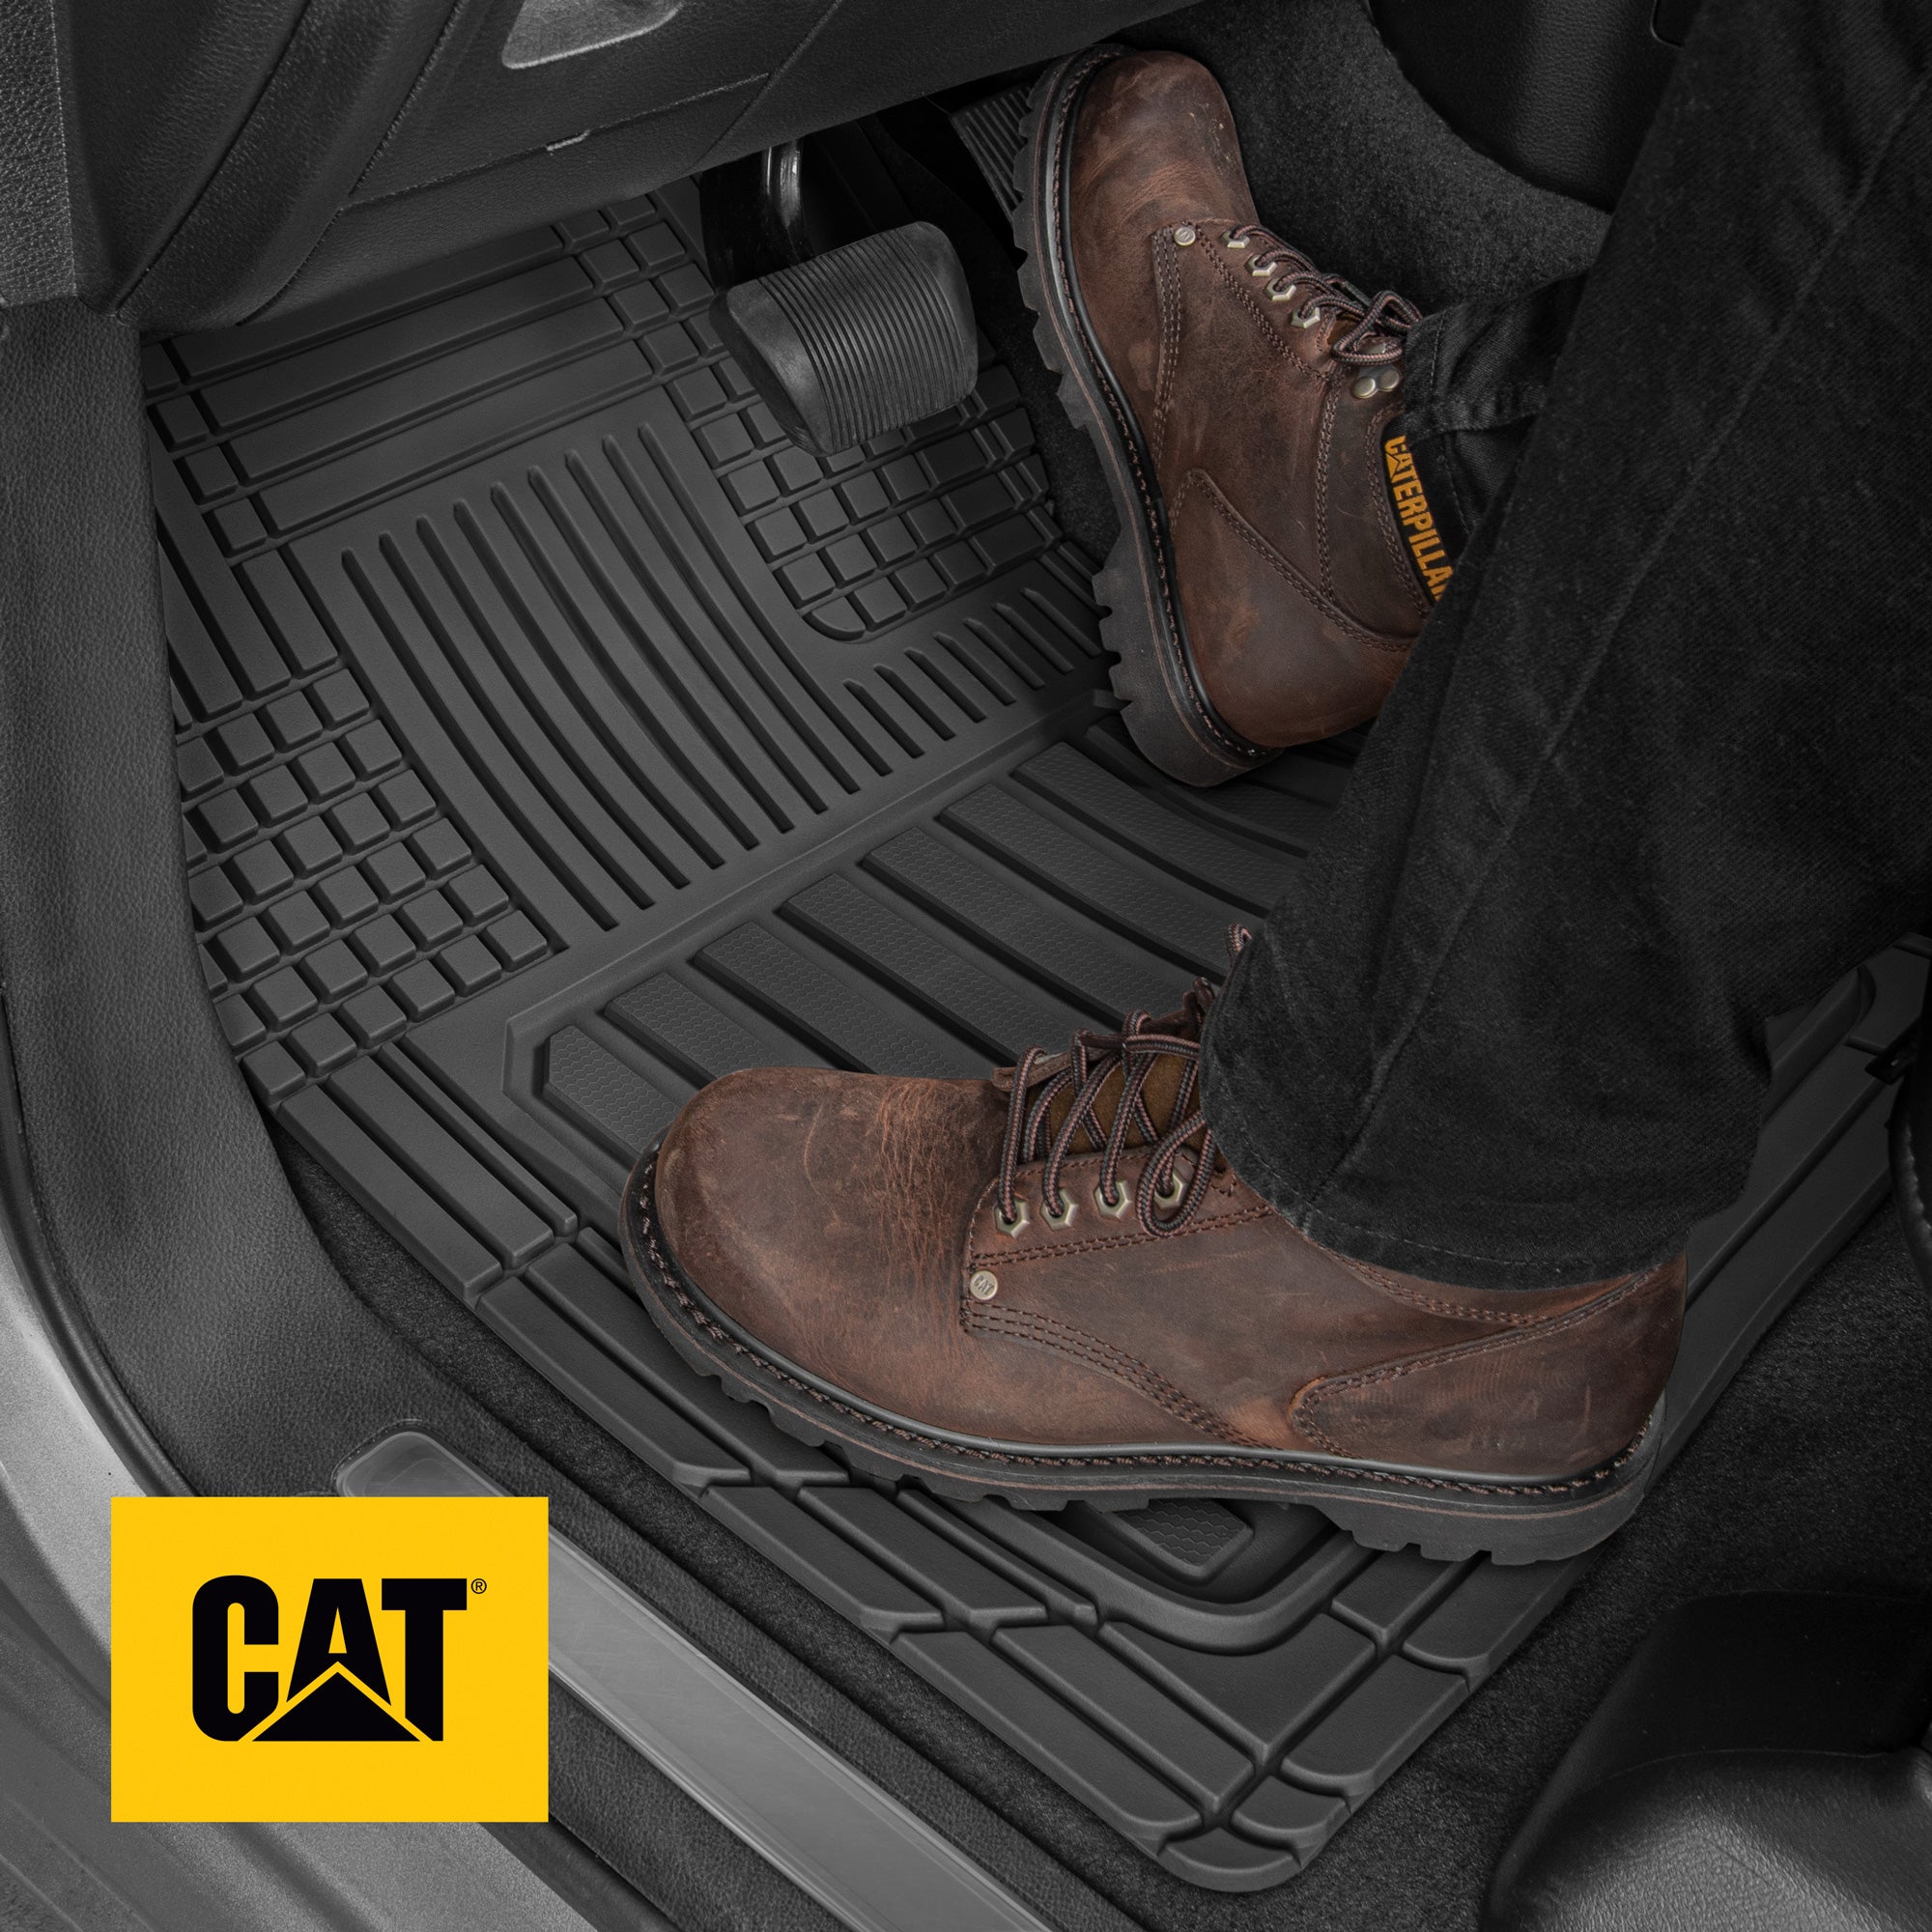 Cat® CAMT-8303 Heavy Duty Car Mats All Weather ToughLiner Floor Mat for Auto Truck SUV & Van, Full Custom Trim to Fit Rubber Liners, Total Protection, Beige